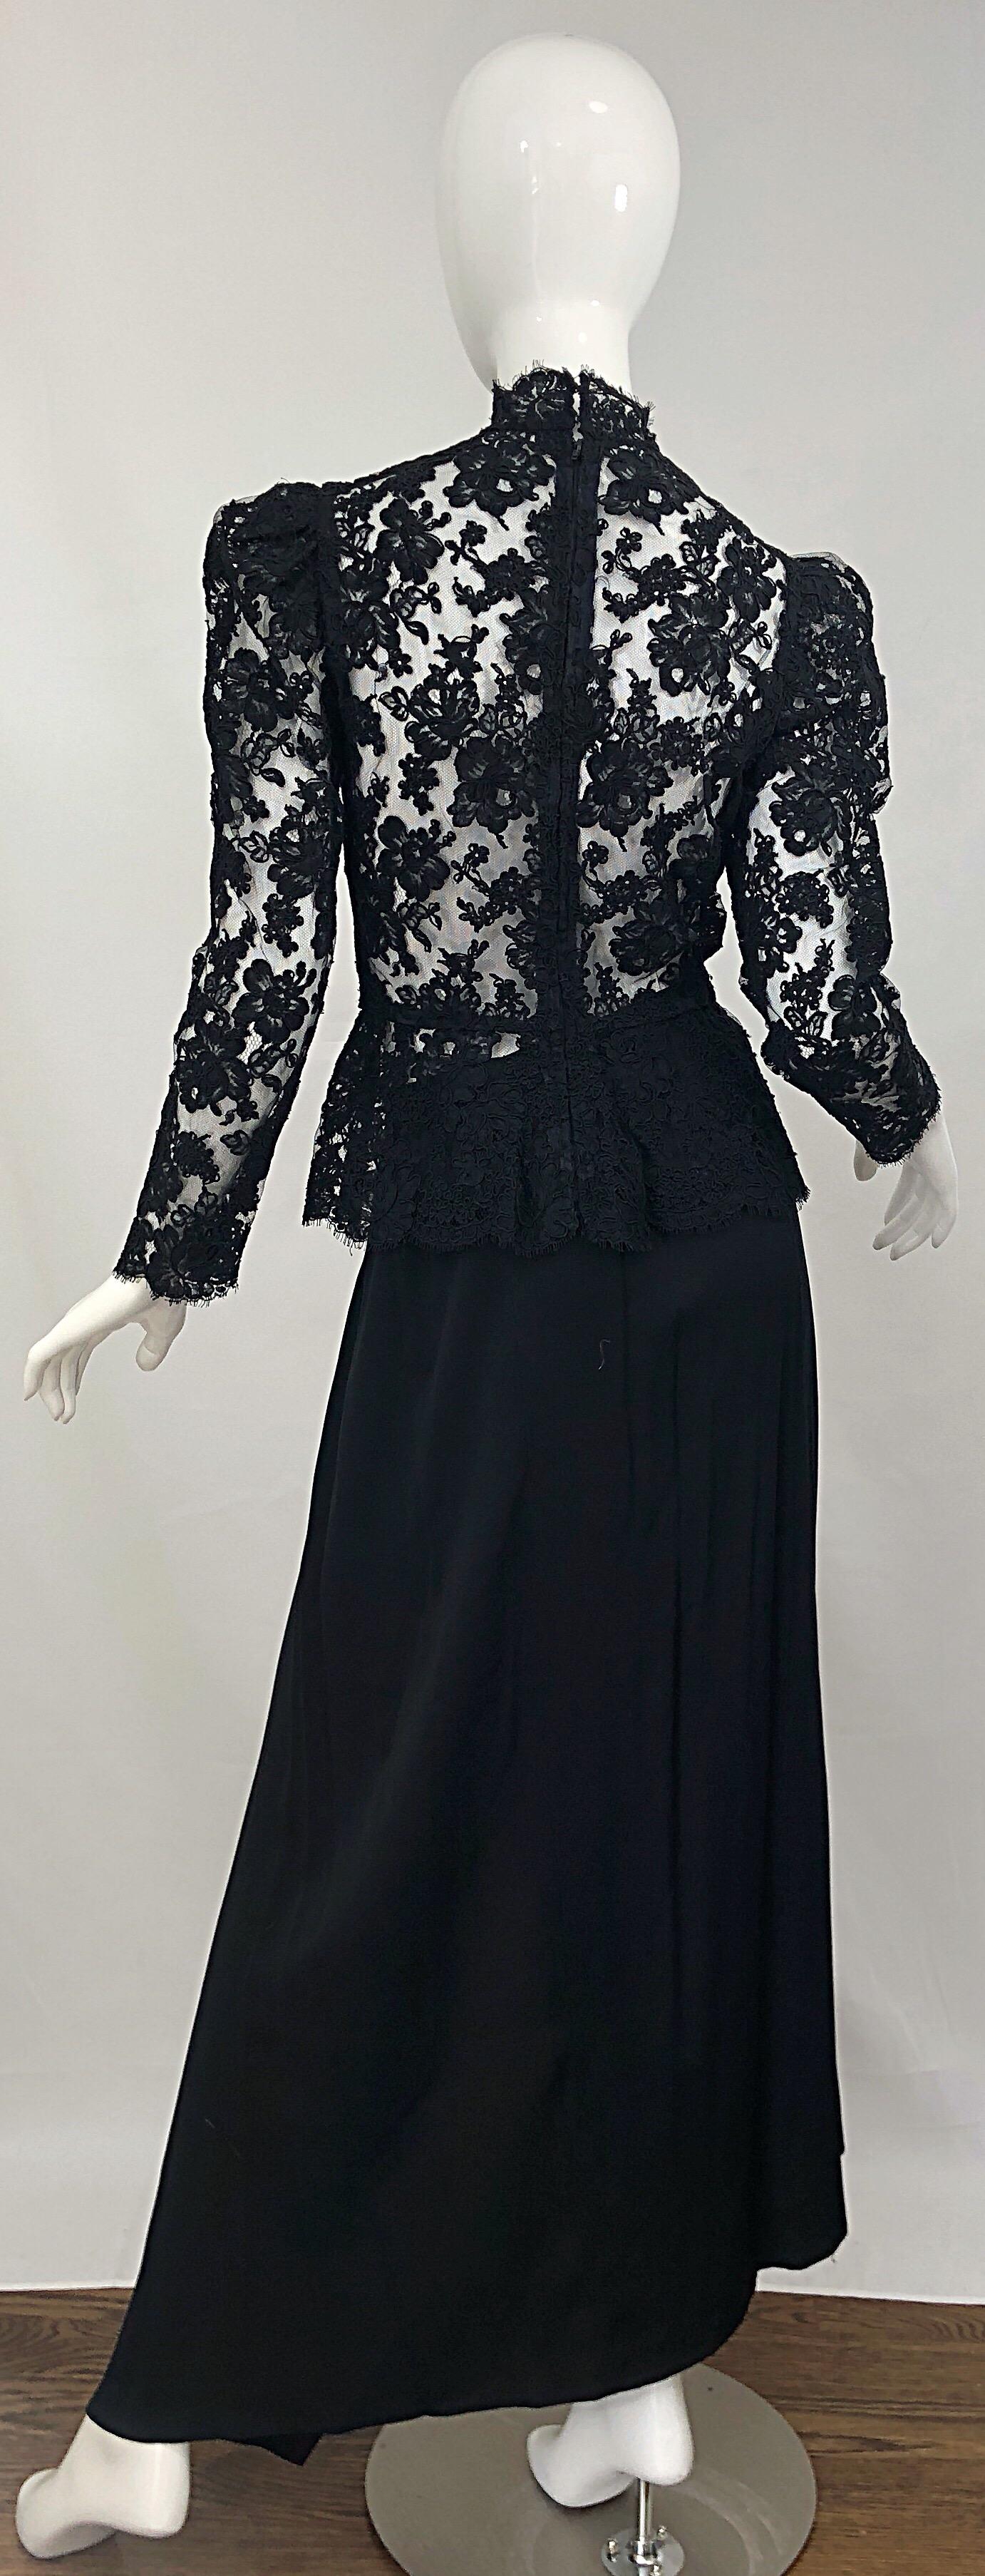 Vintage Vicky Tiel Couture 1980s Black Lace Victorian Top + Asymmetrical Skirt In Excellent Condition For Sale In San Diego, CA